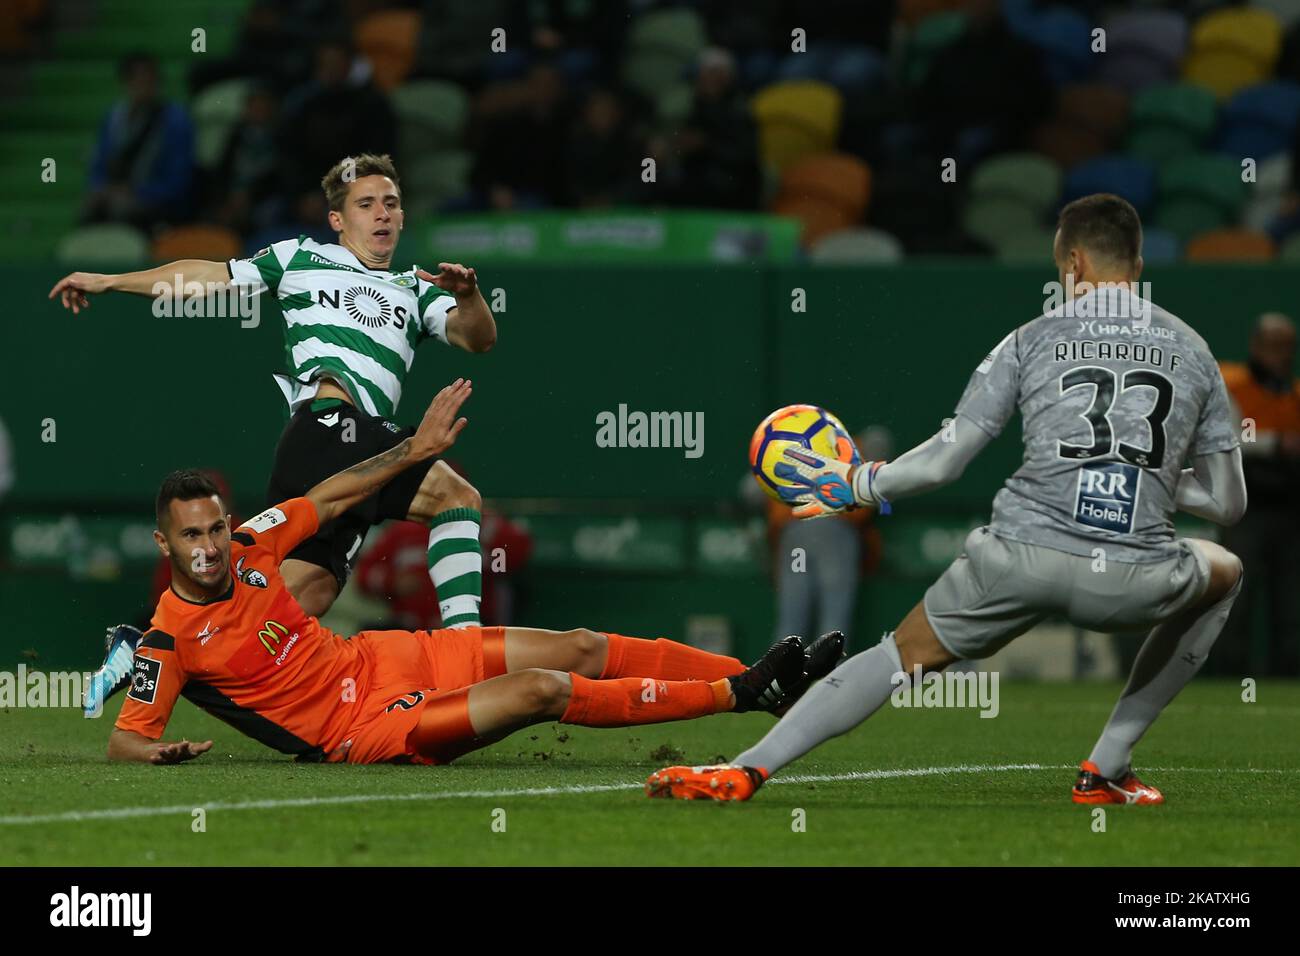 Sportings forward Daniel Podence from Portugal (L) and Portimonense's goalkeeper Ricardo Ferreira (R) during Premier League 2017/18 match between Sporting CP and Portimonense SC, at Alvalade Stadium in Lisbon on December 17, 2017. (Photo by Bruno Barros / DPI / NurPhoto)  Stock Photo